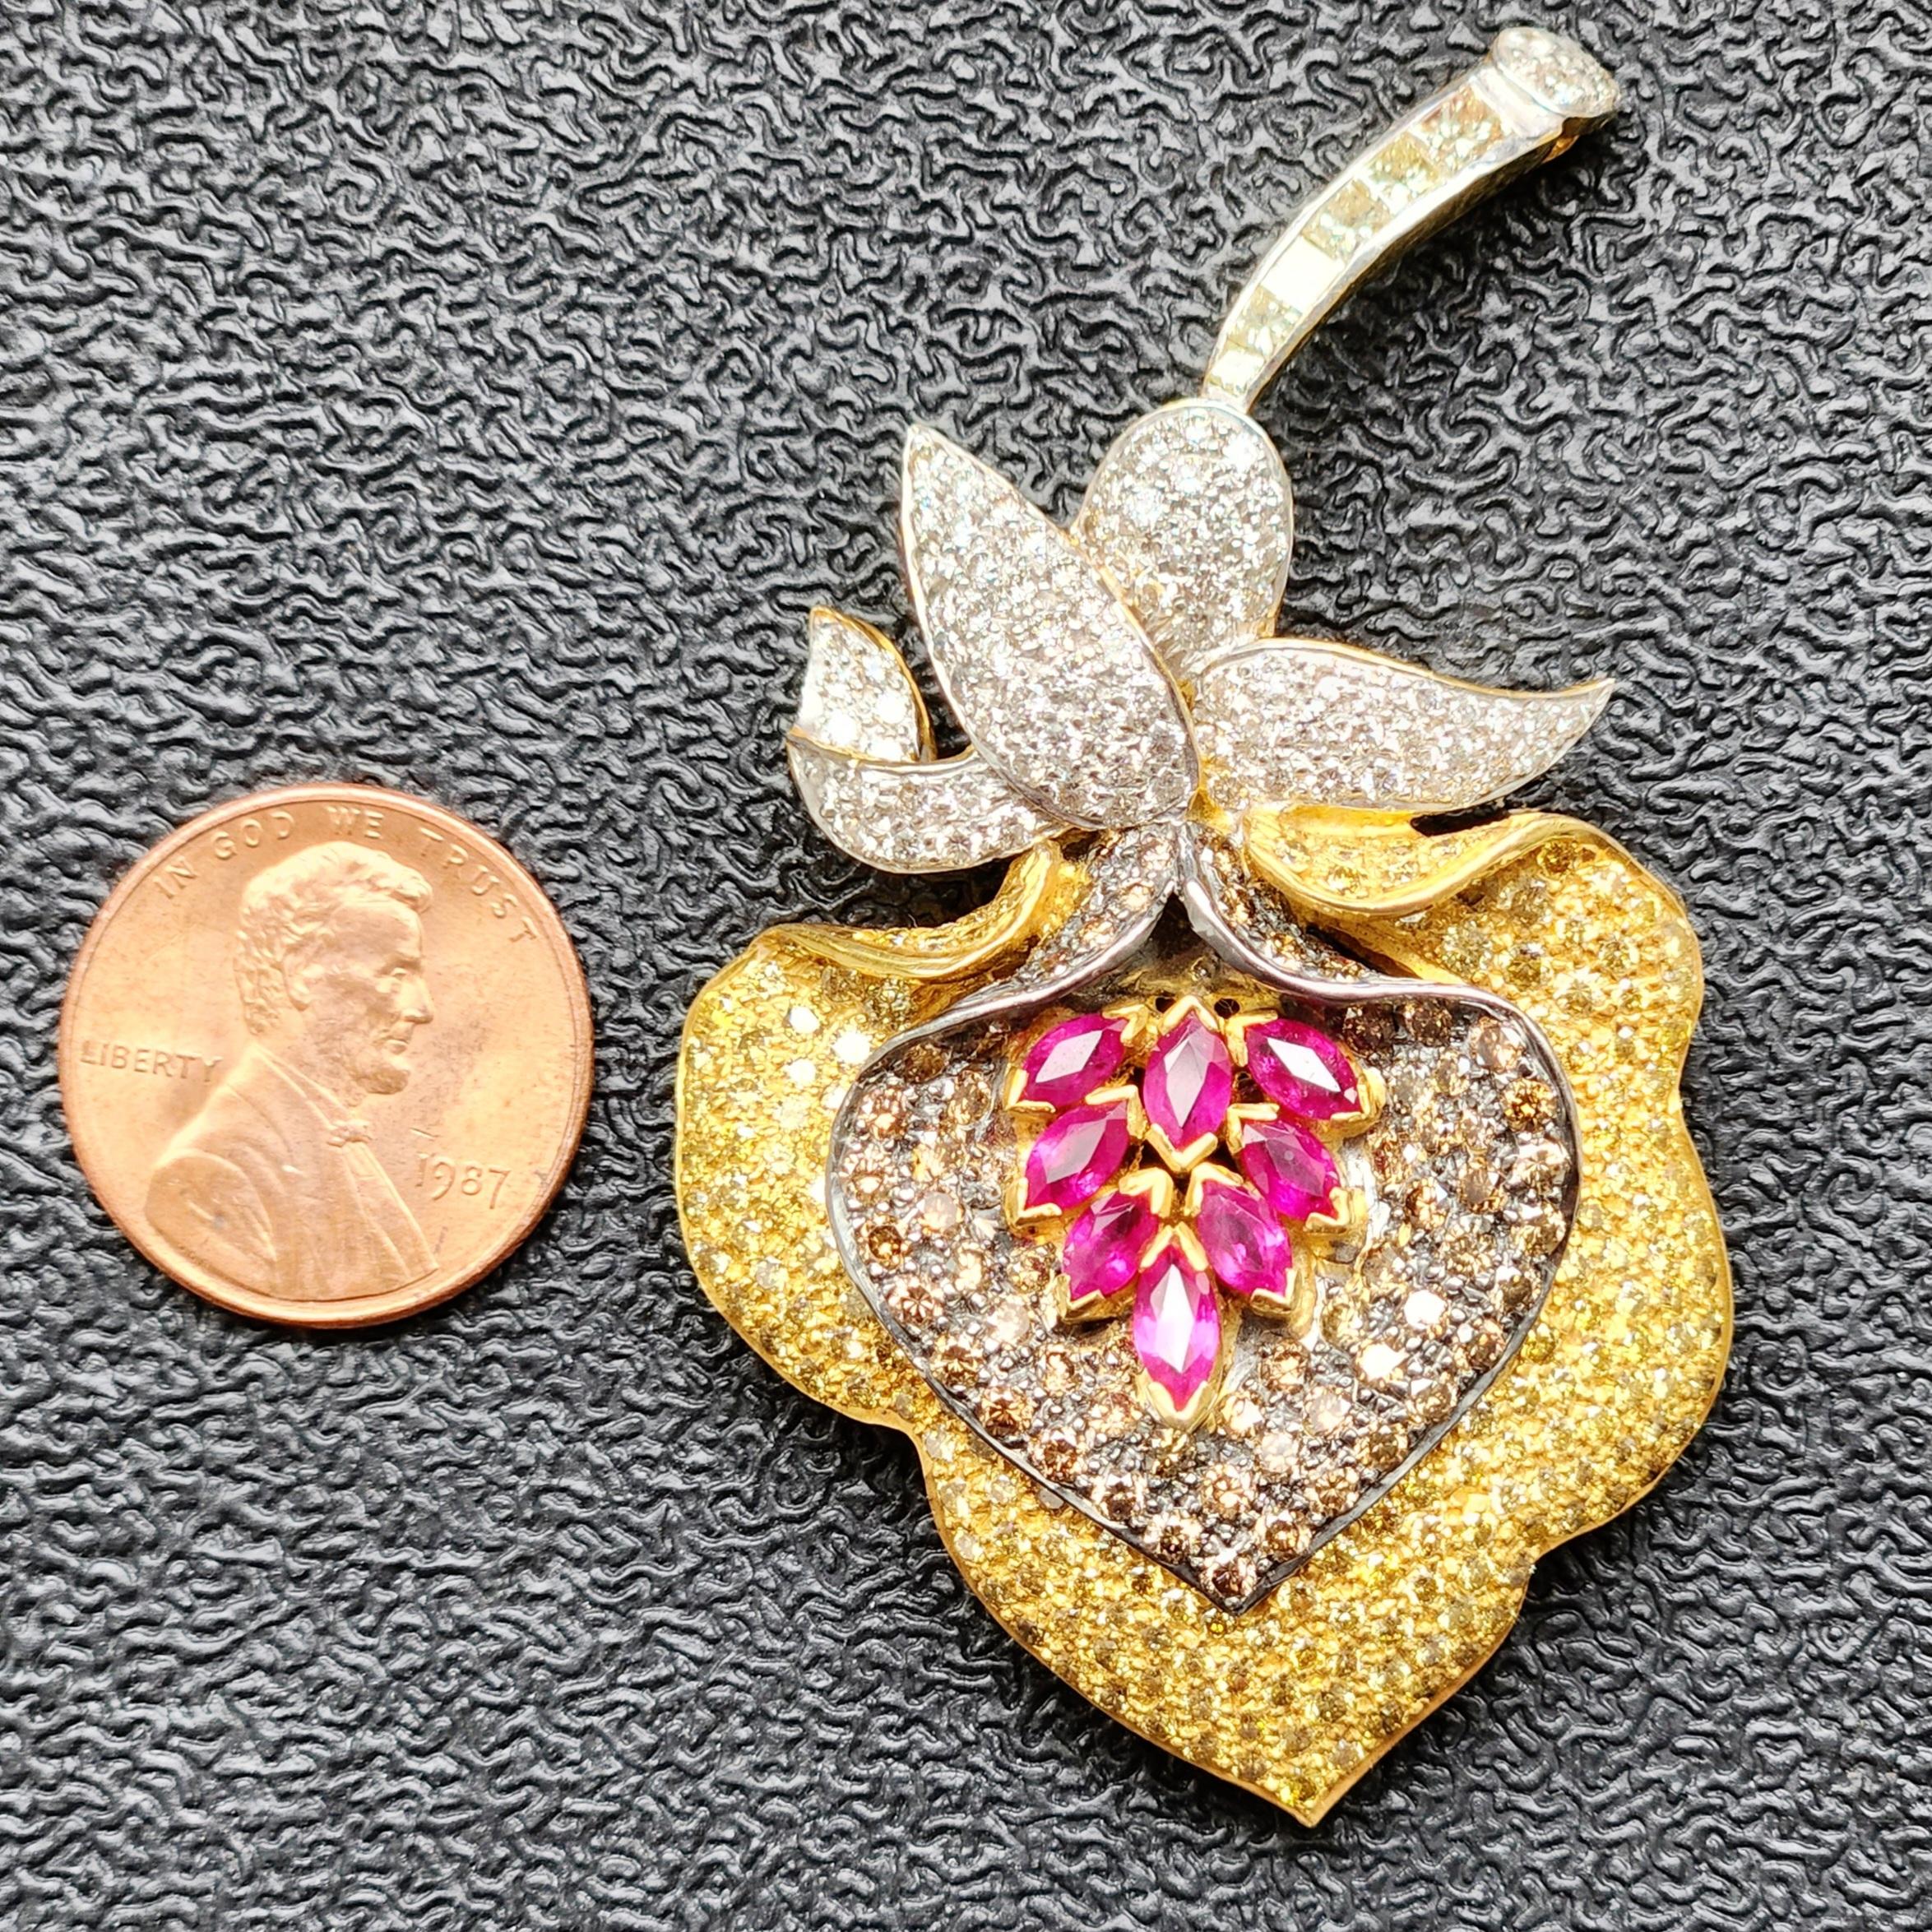 The Flower Shaped Multicolor Diamond Brooch Pendant of 20.8 grams is a stunning piece of jewelry that exudes elegance and sophistication. Crafted from 18K white and yellow gold, this brooch pendant features a center seed made from red